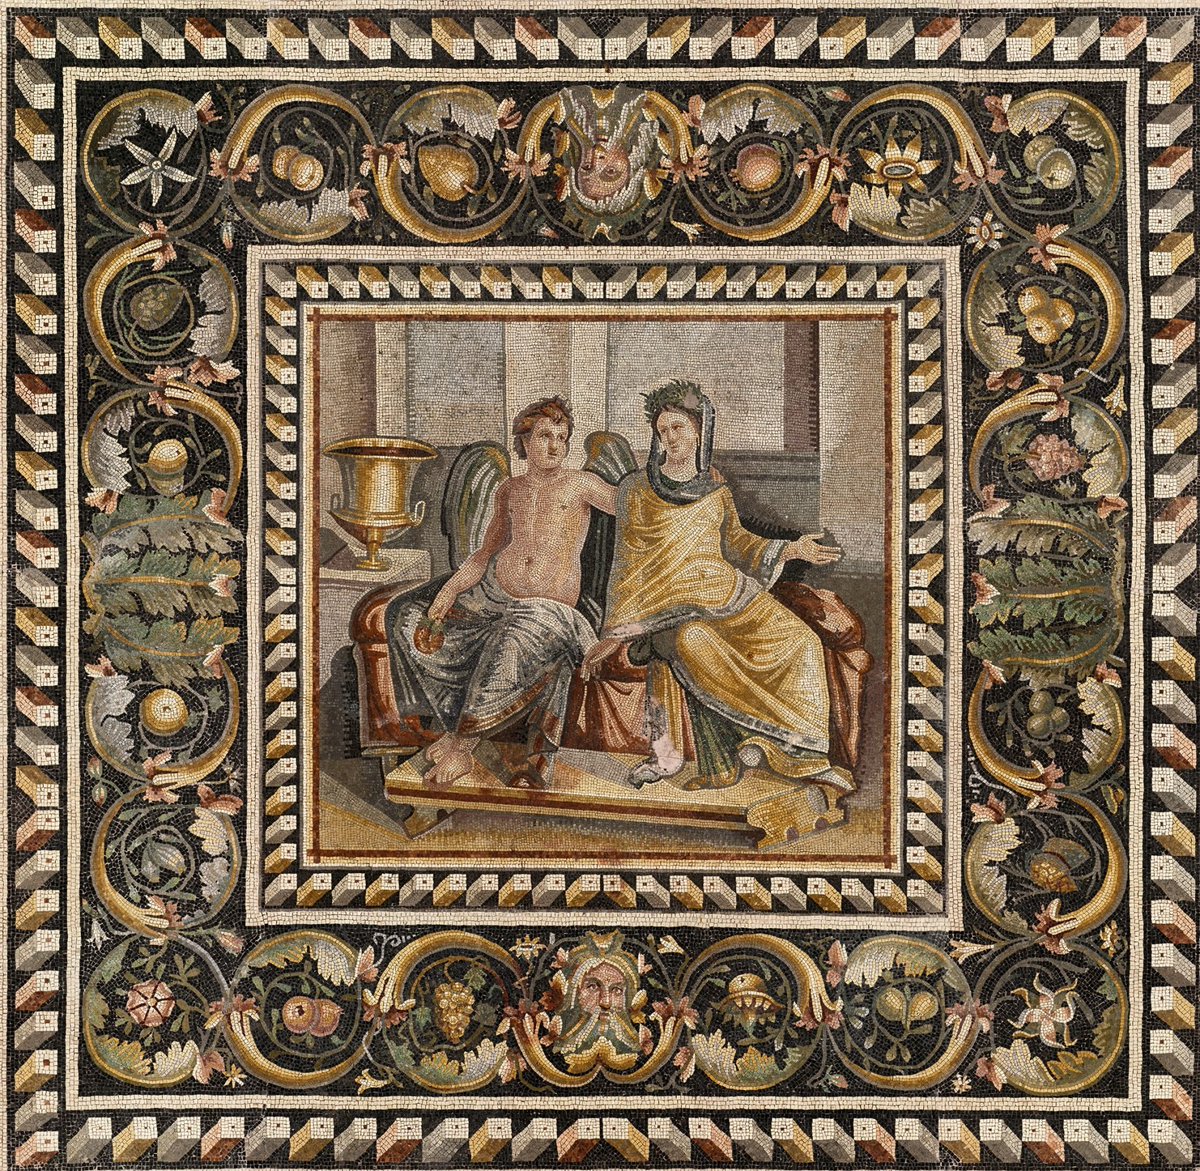 #MosaicMonday - The 'Eros and Psyche' Mosaic, from the Villa of Poseidon at Zeugma: ca. Early 3rd Century AD. Although the central emblema is lovely, for me the border is the star of the show here! #Art Image: Centro di Conservazione Archeologica. Link - ccaroma.org/project/zeugma…